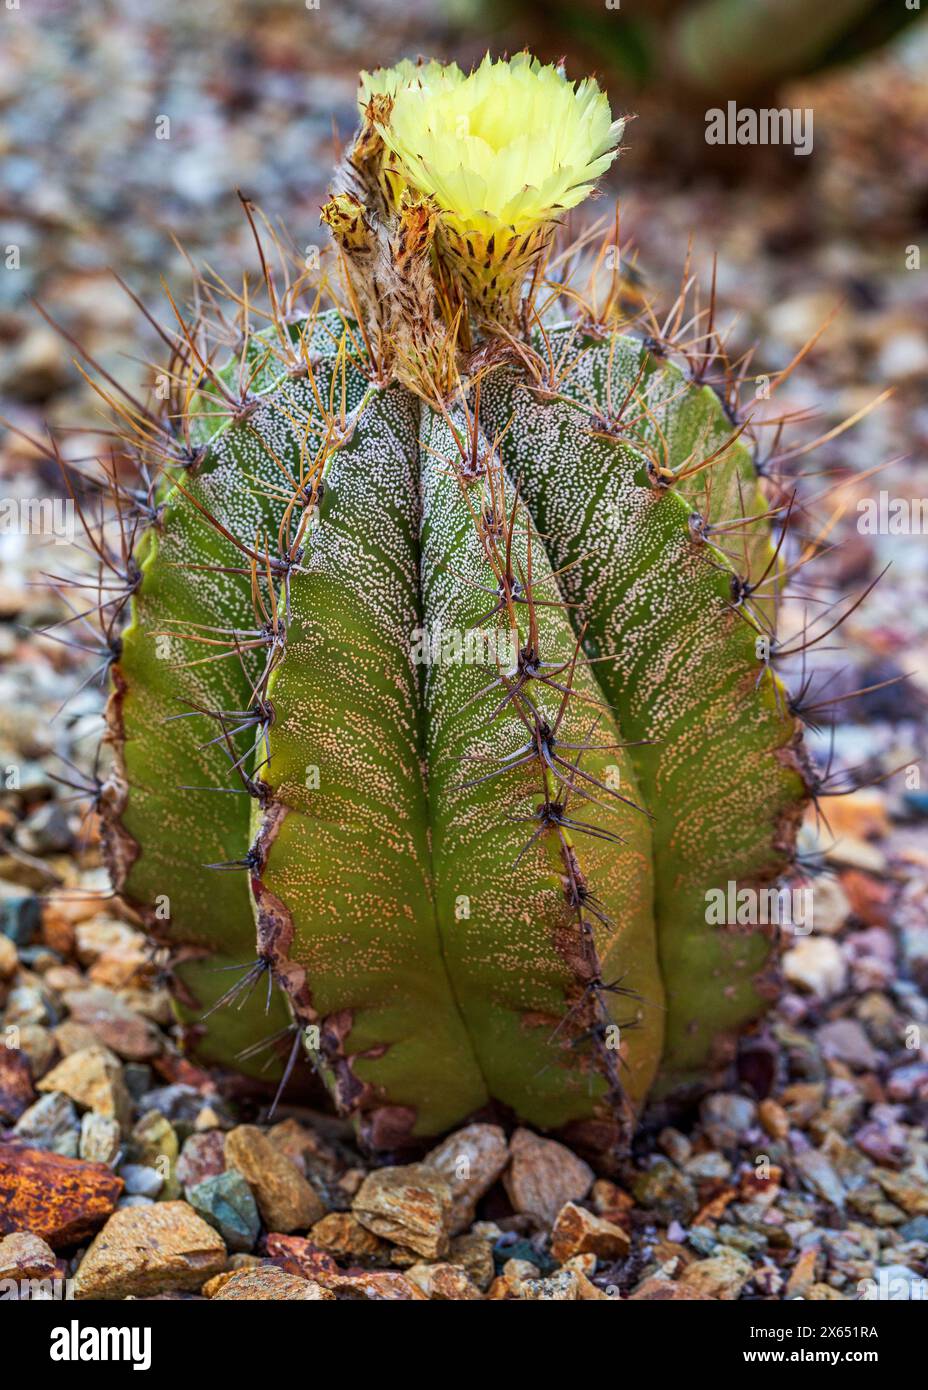 Monk's Hood Cactus with Yellow Flower. Blooming bishop's cap cactus. Solitary cylindrical cactus from Mexico's Central Plateau. Astrophytum ornatum Stock Photo